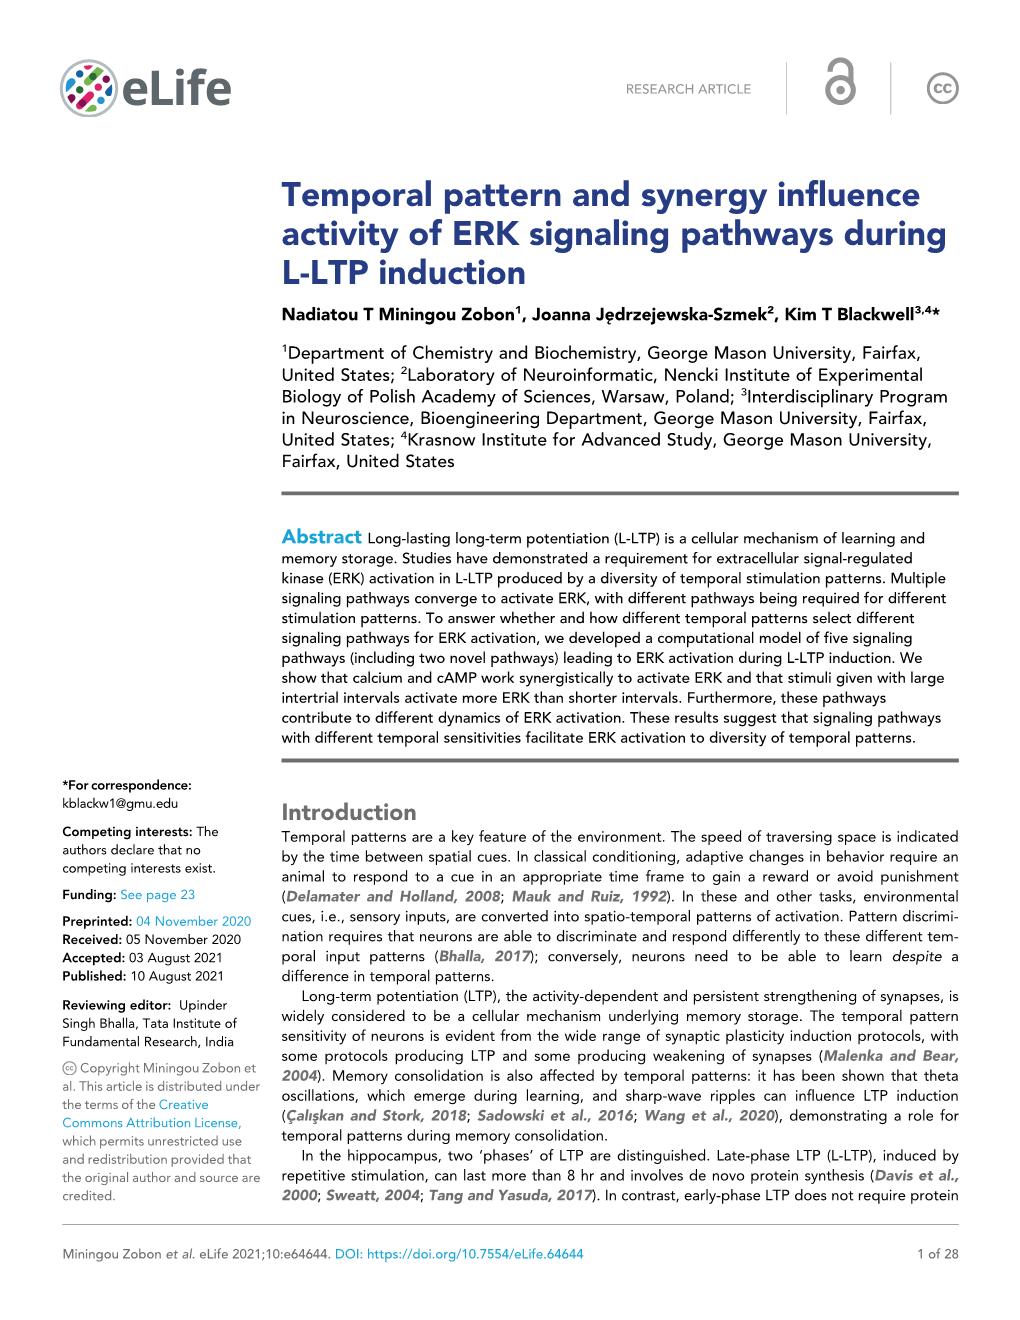 Temporal Pattern and Synergy Influence Activity of ERK Signaling Pathways During L-LTP Induction